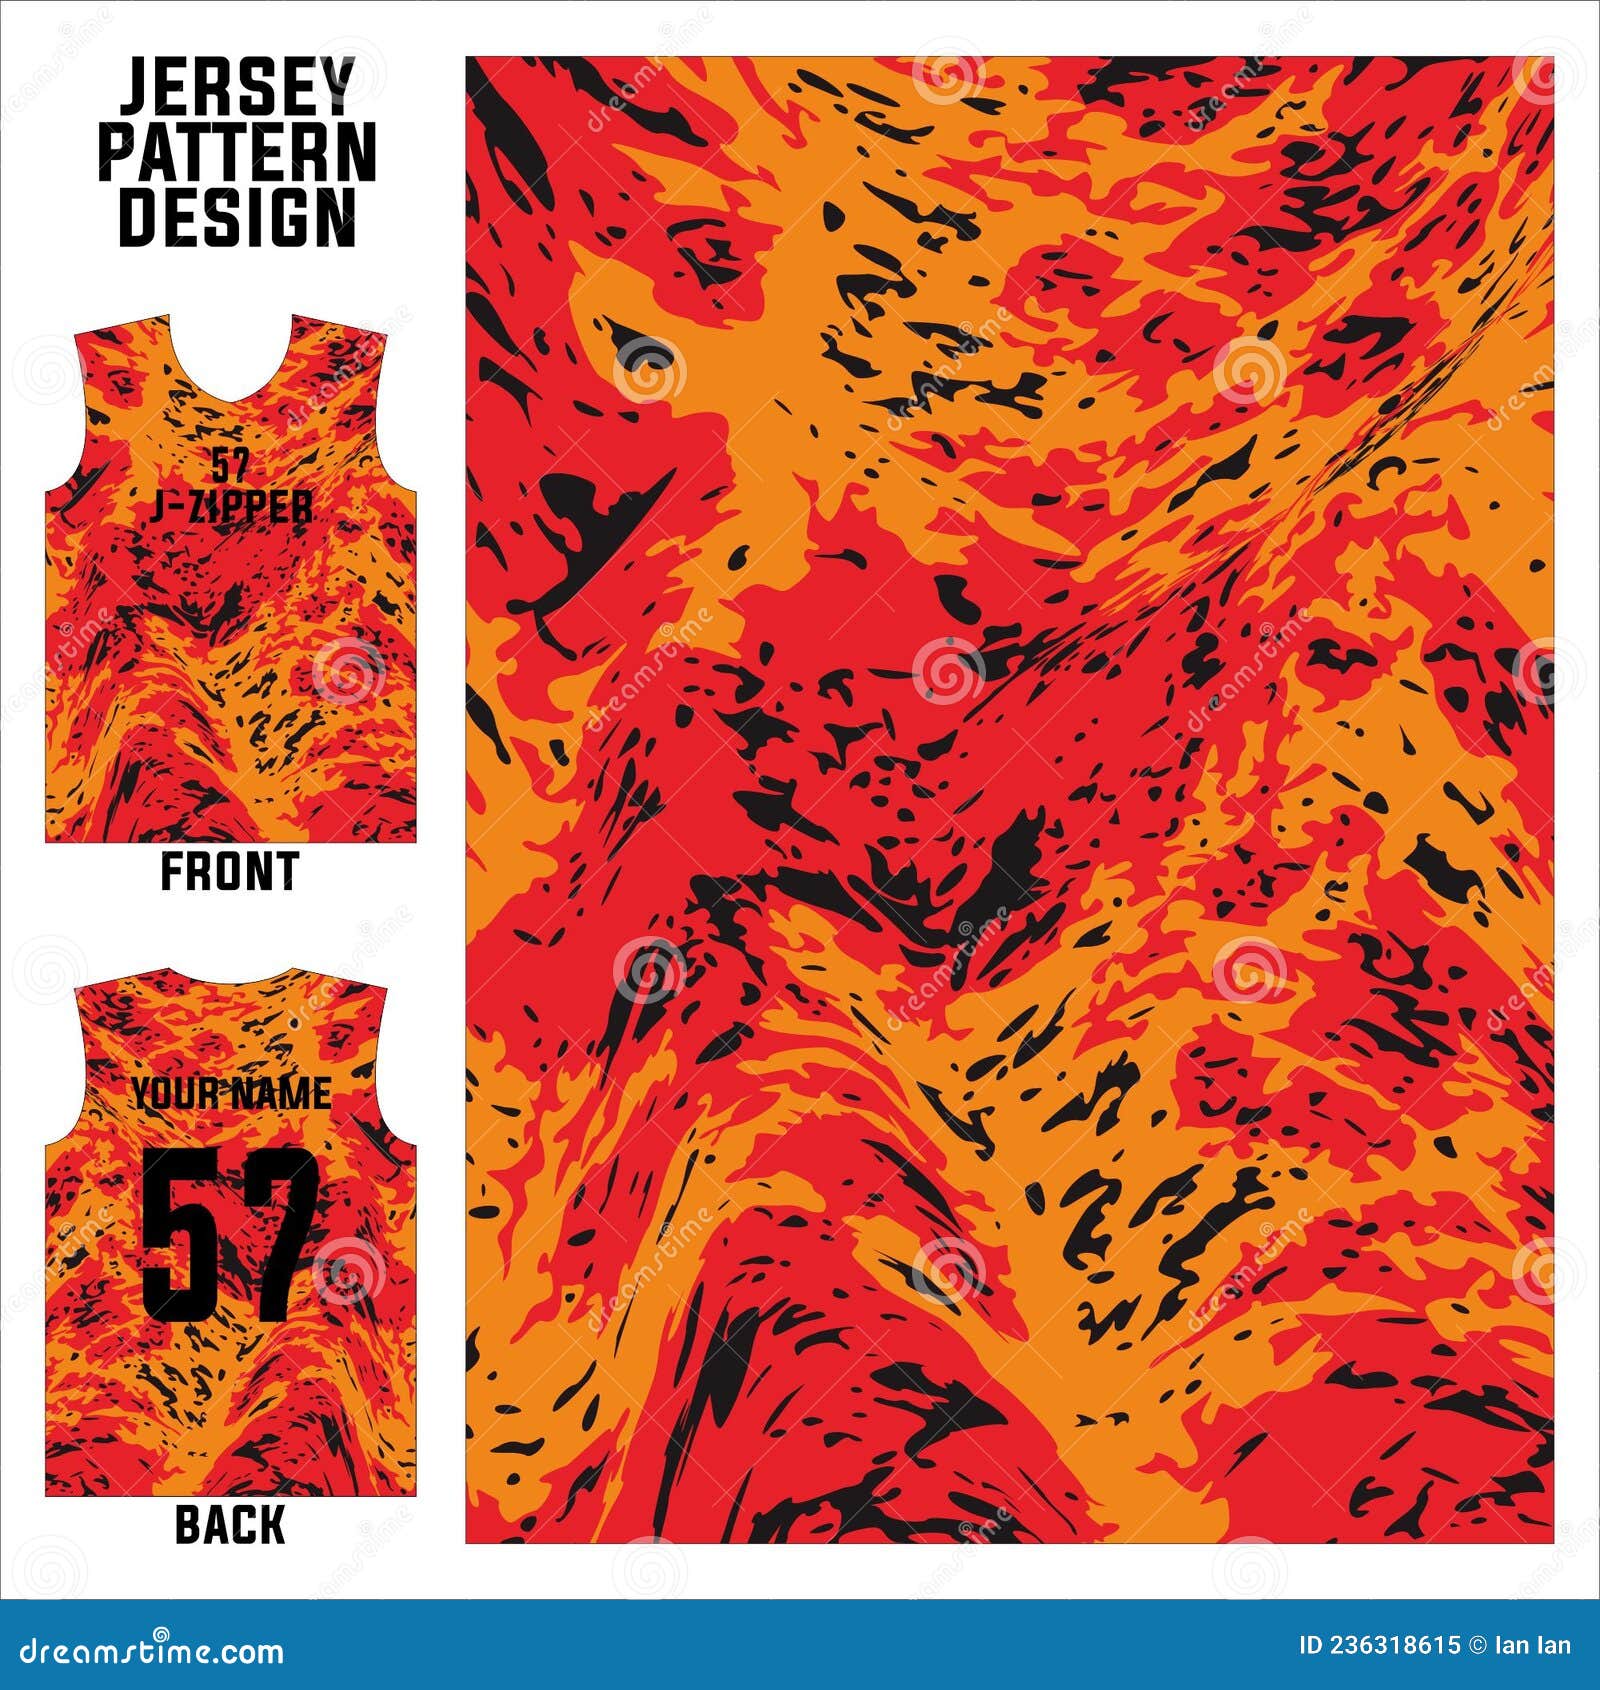 basketball jersey pattern design template. black red abstract